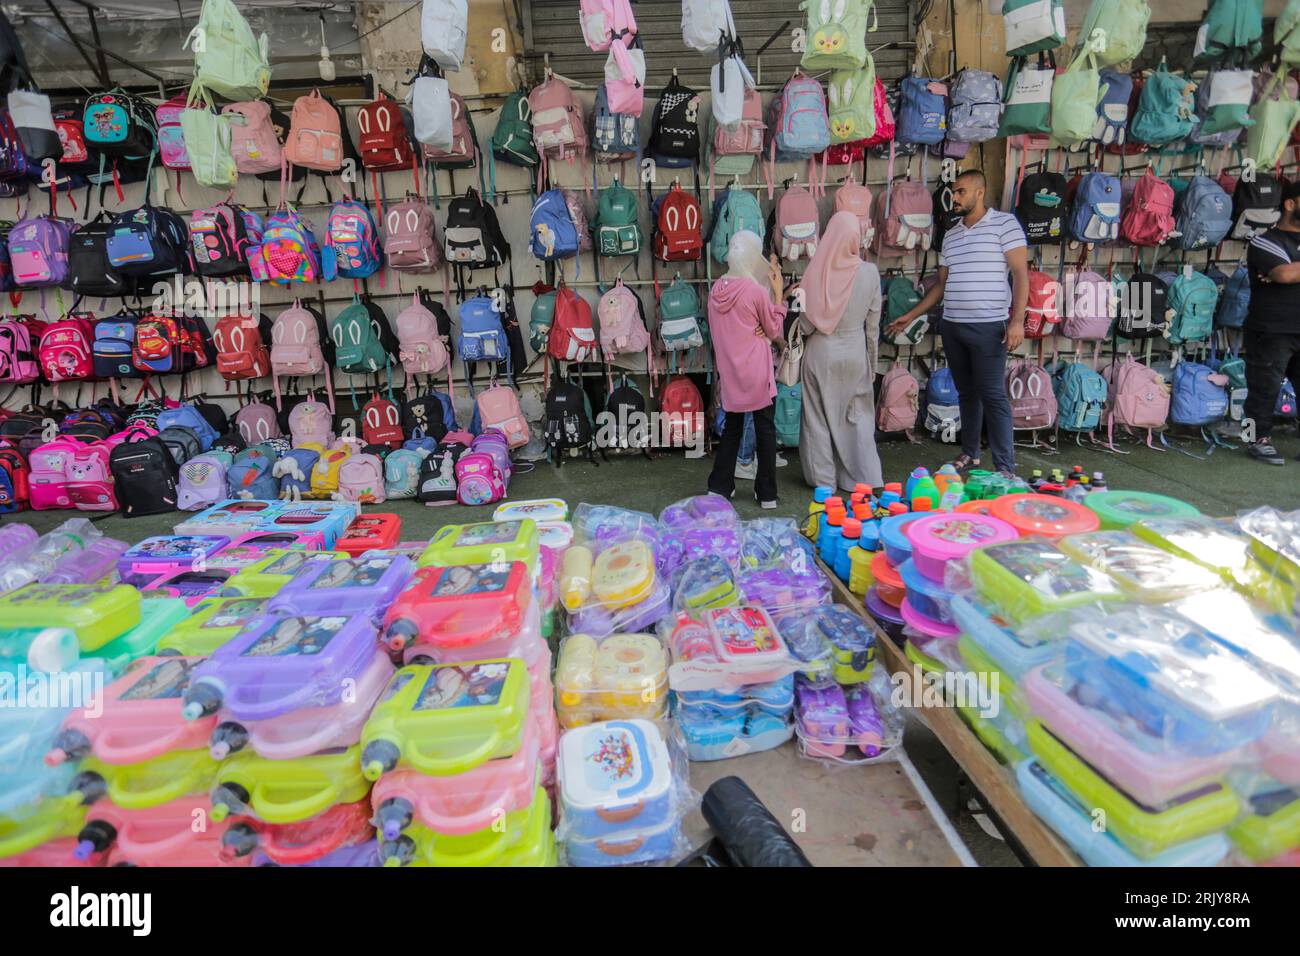 Palestinians seen shopping during the preparation for the new school year at the market in Gaza. Stock Photo